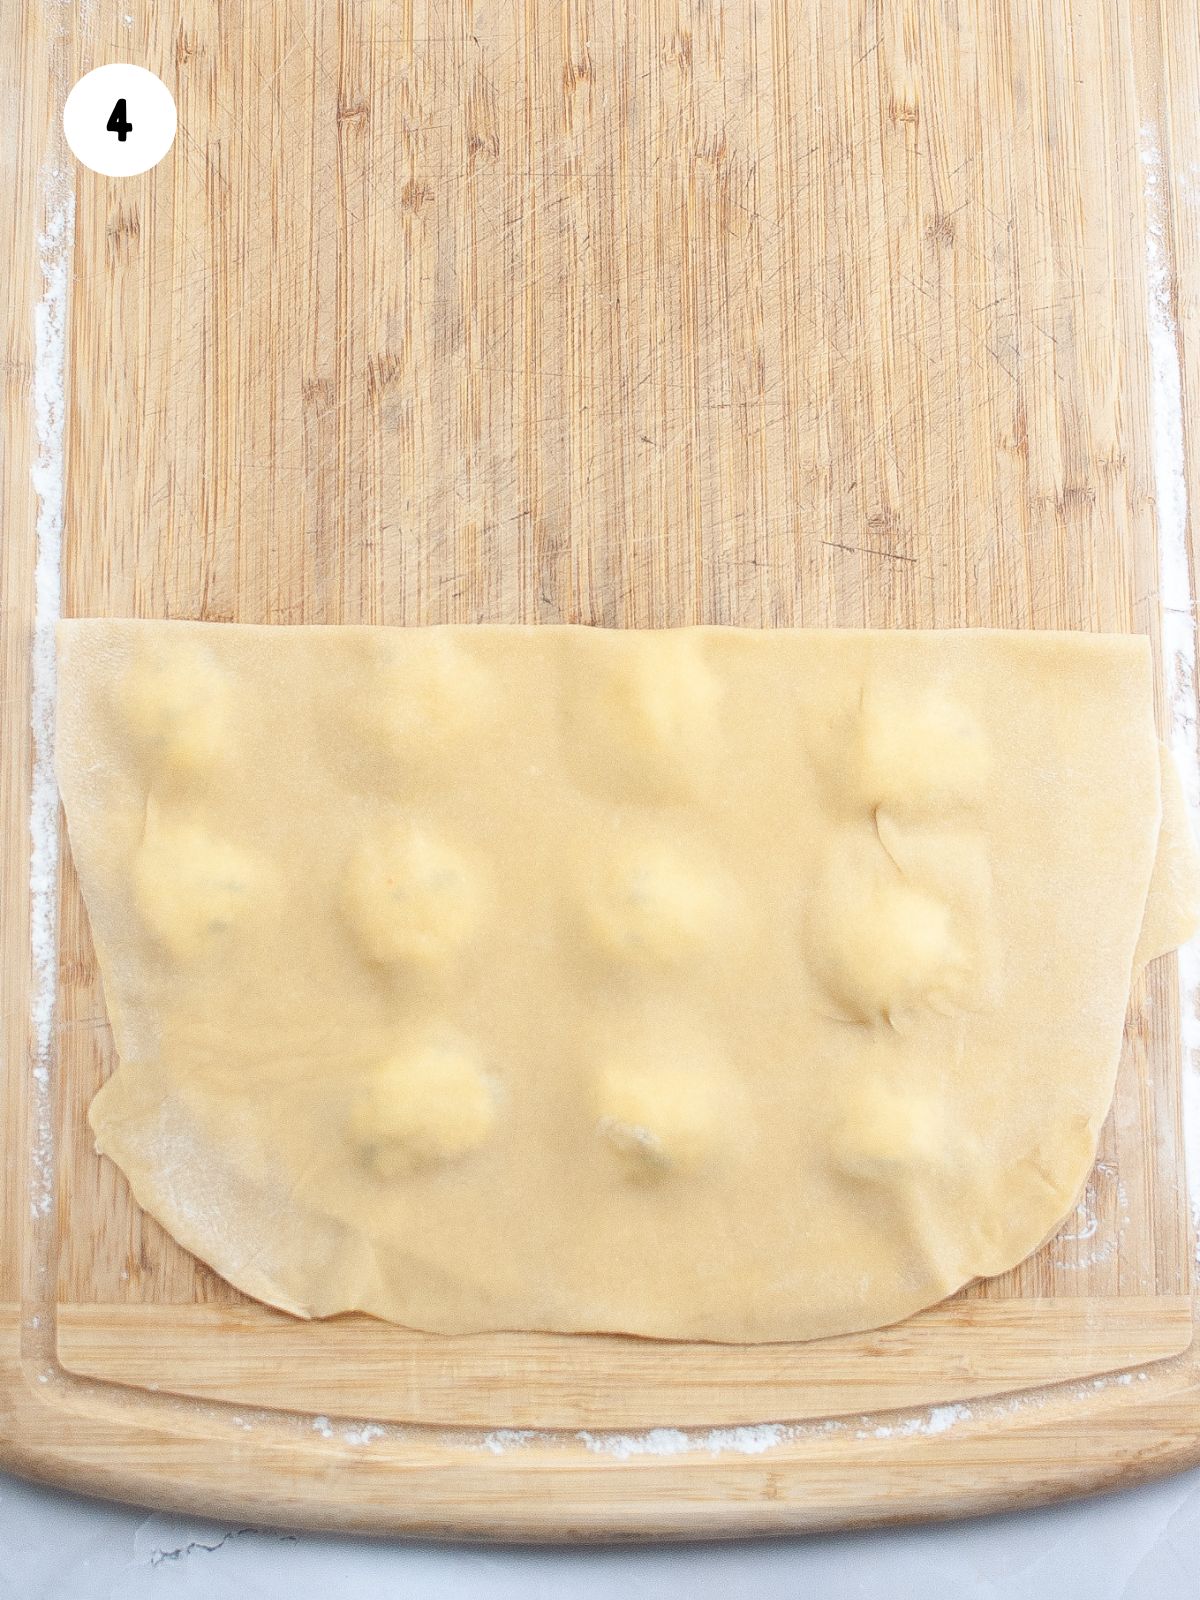 4 - Fold dough over the filling